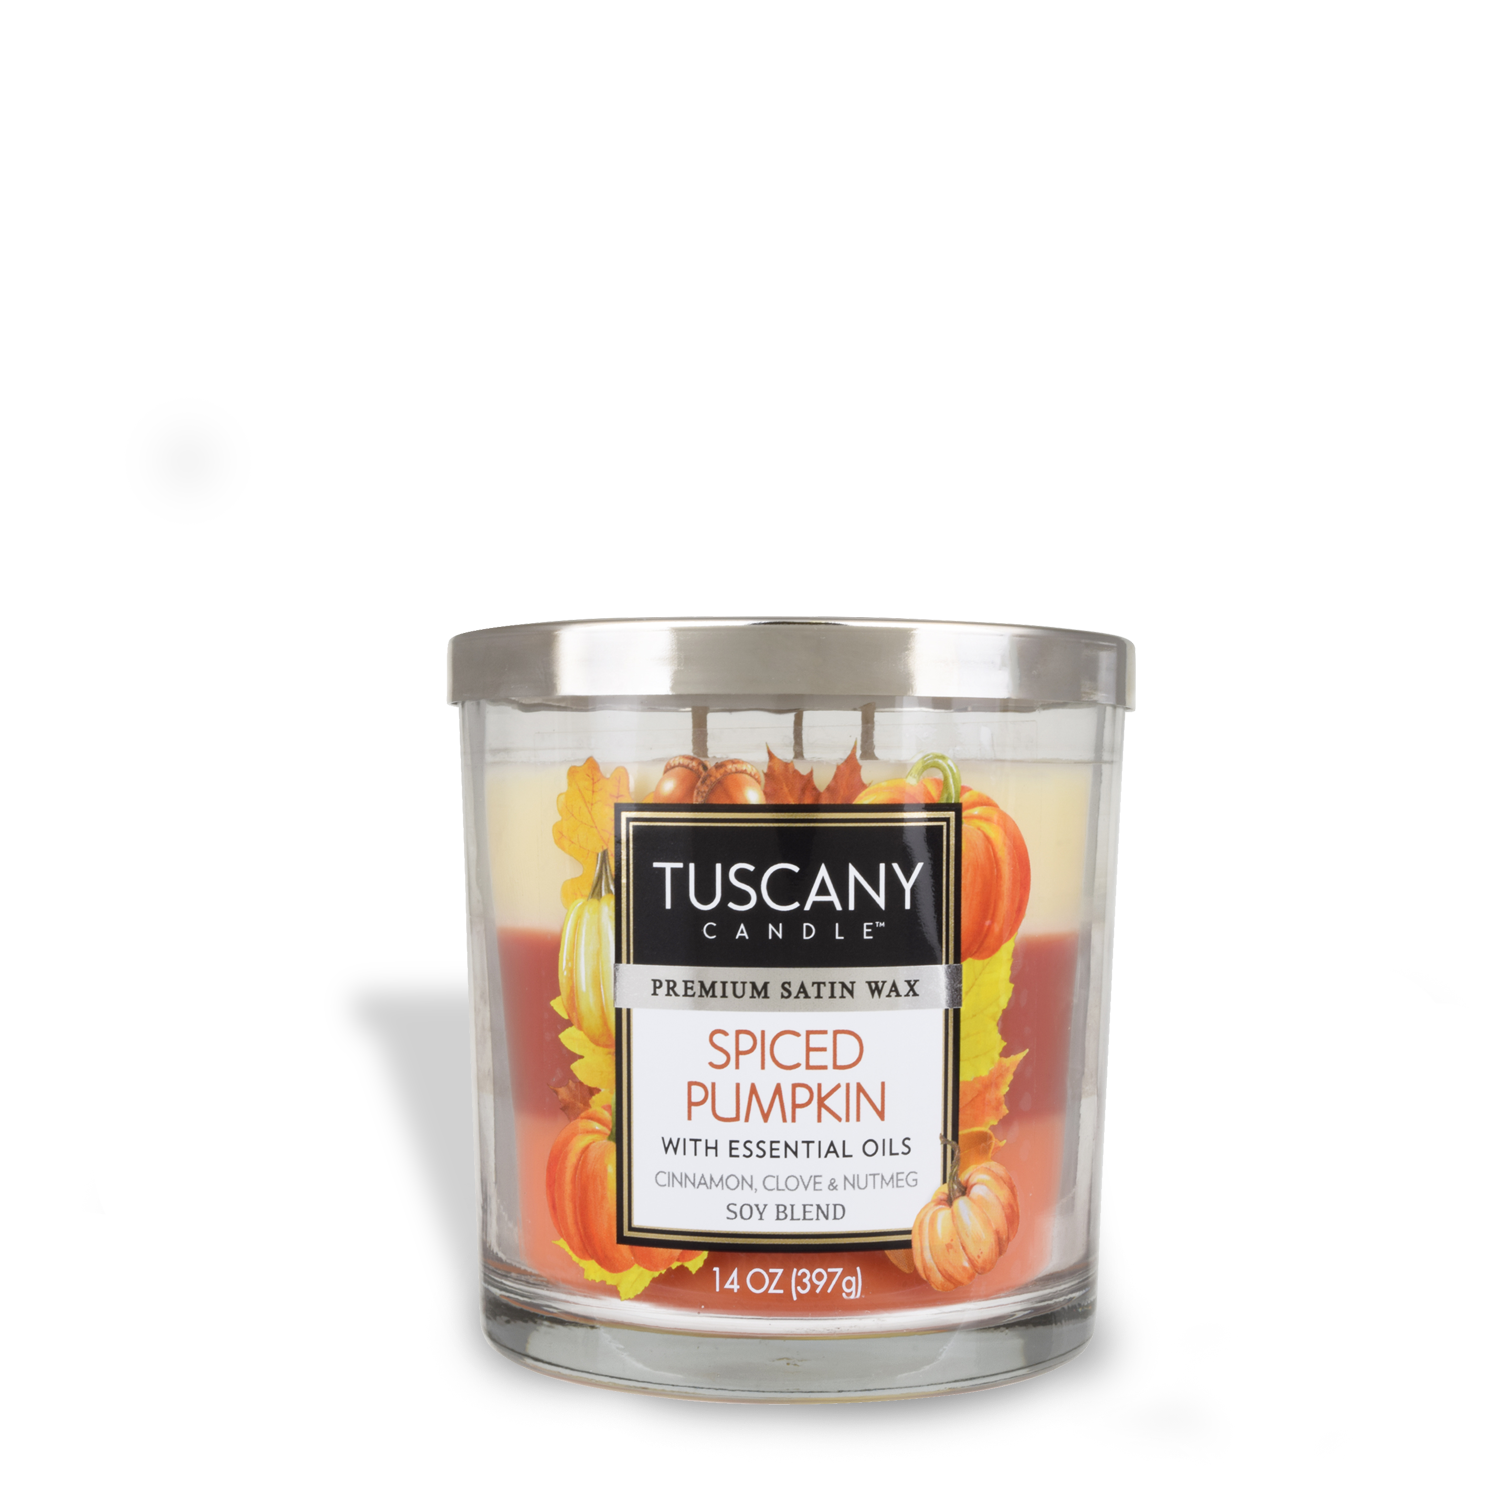 A fragrant Spiced Pumpkin Long-Lasting Scented Jar Candle (14 oz) by Tuscany Candle on a white background.